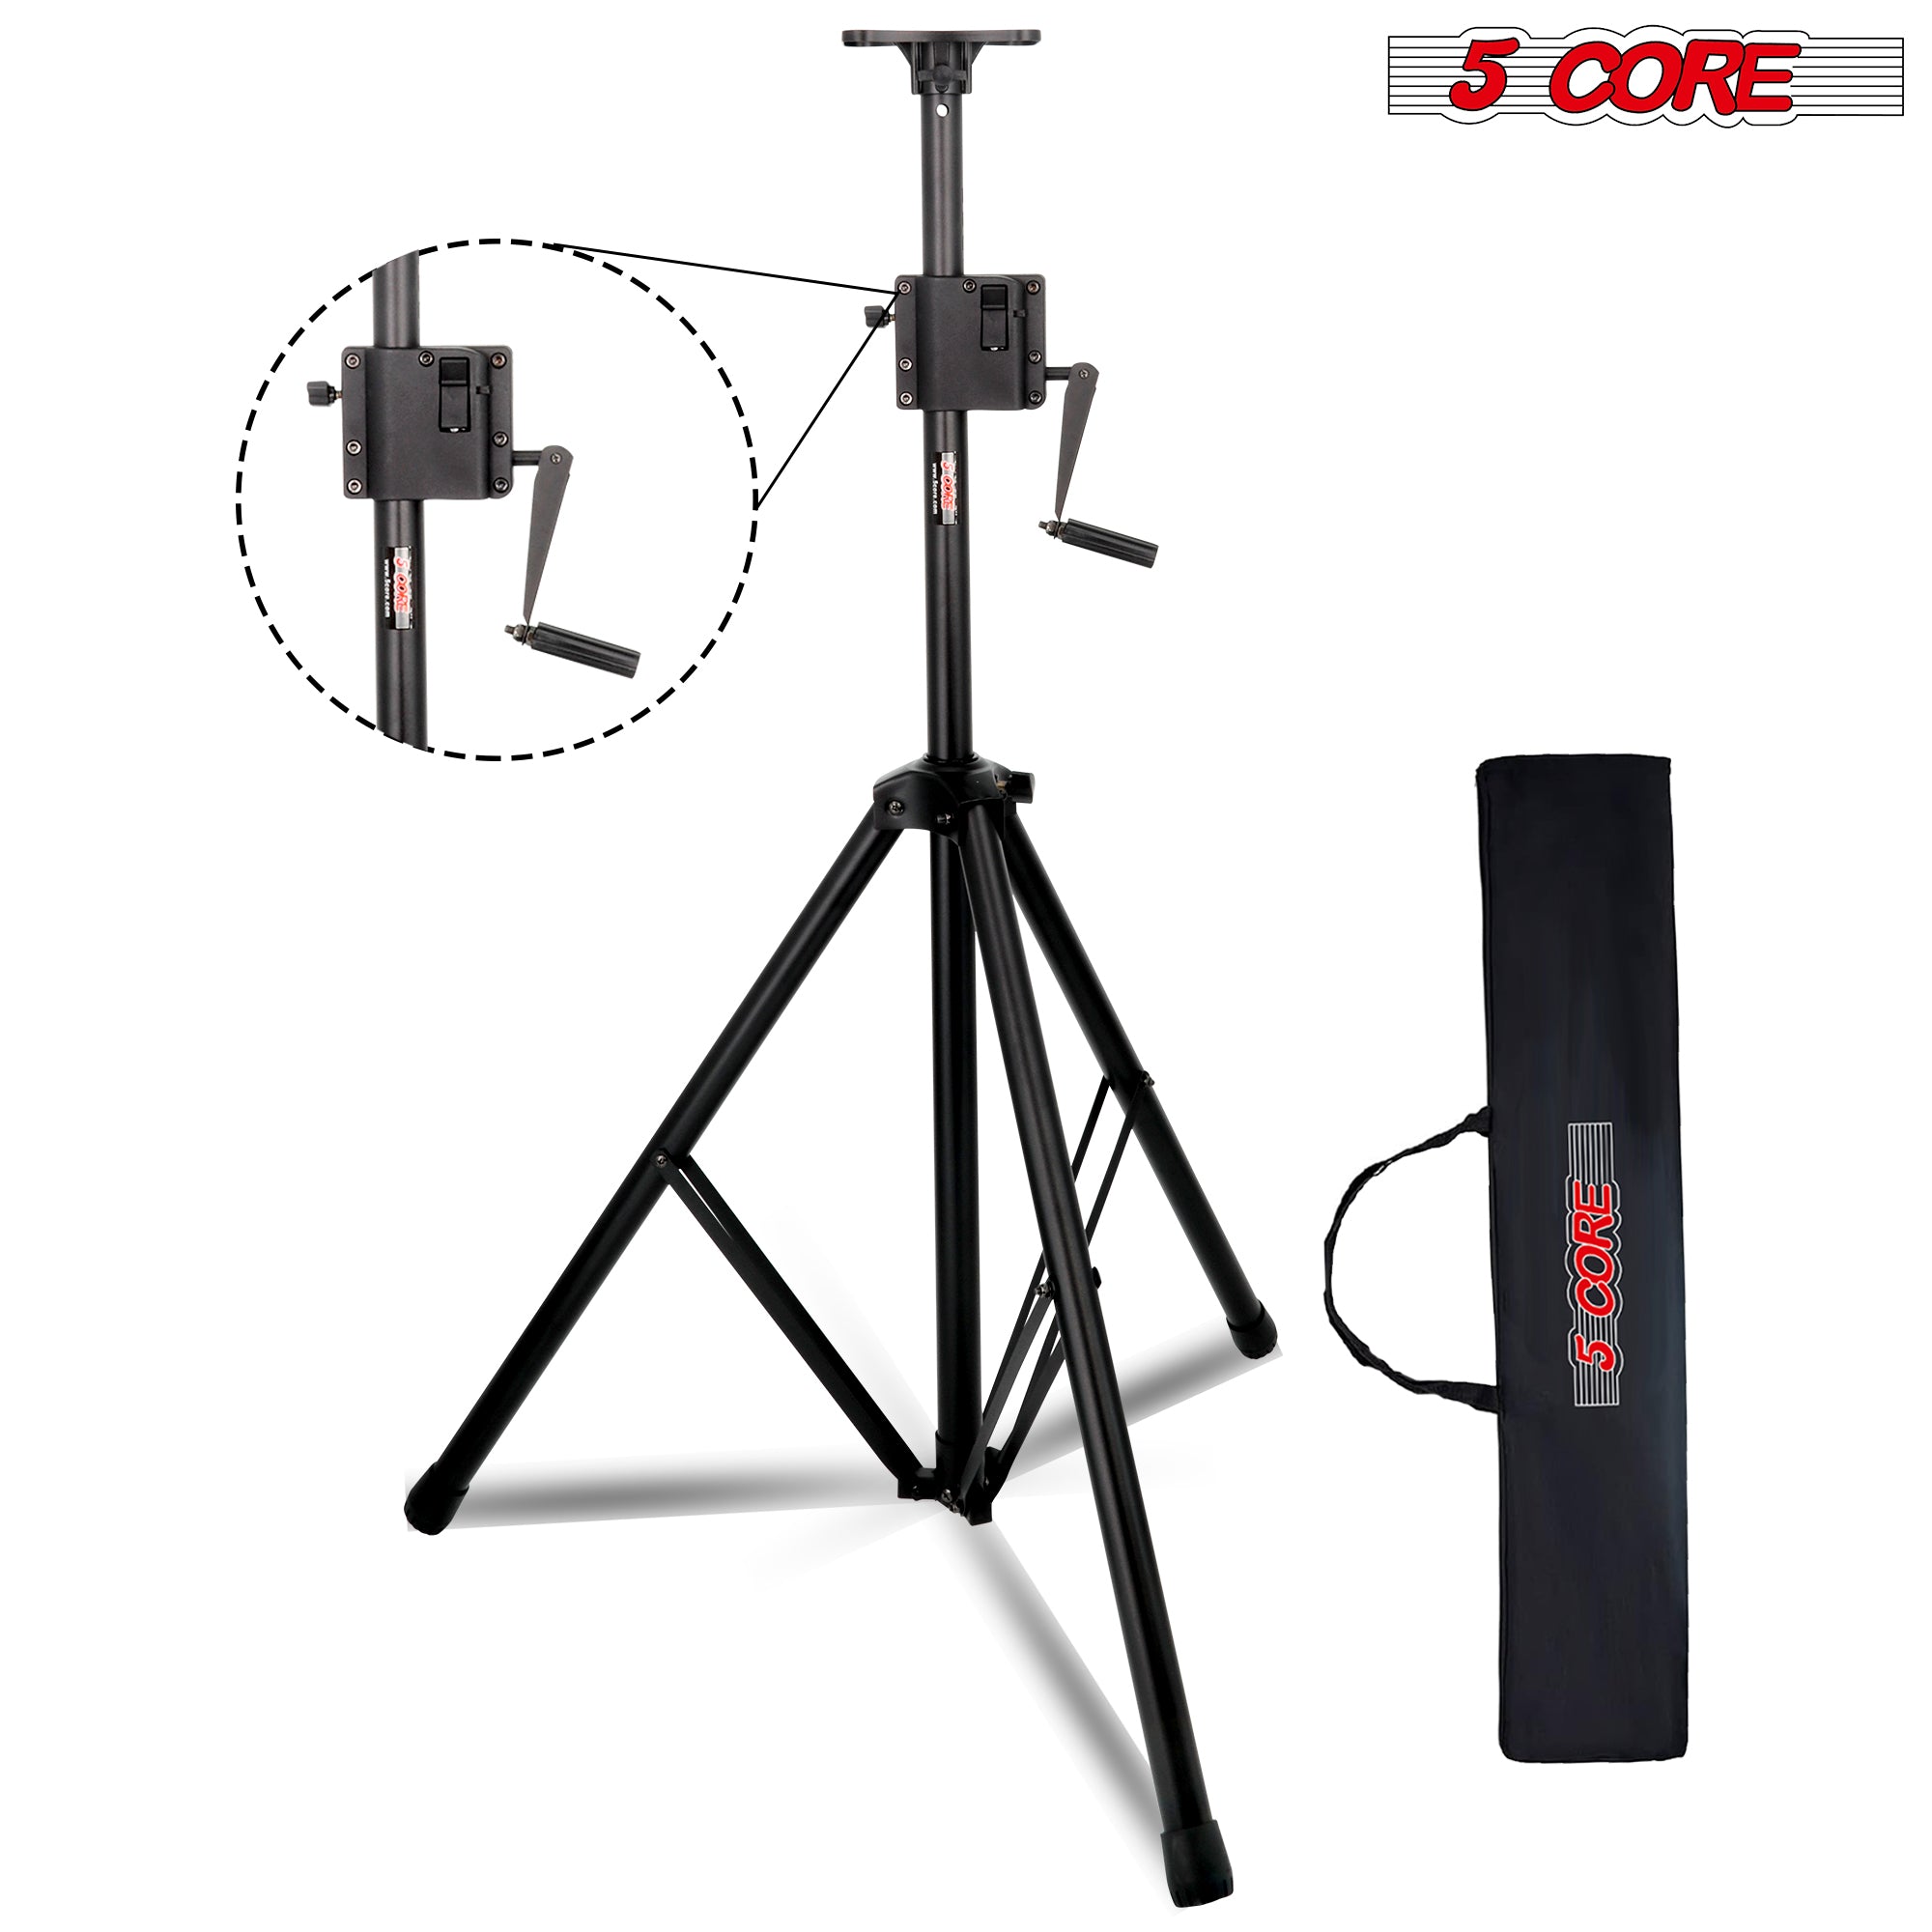 5 Core Crank Up Speaker Stand Height Adjustable 6ft-10 Inches Max Heavy Duty for Stage Light DJ monitor Holder 185LB Load Capacity w/ Safety Switch + Aluminum Mount + Carry Bag Black - SS HD CRANK